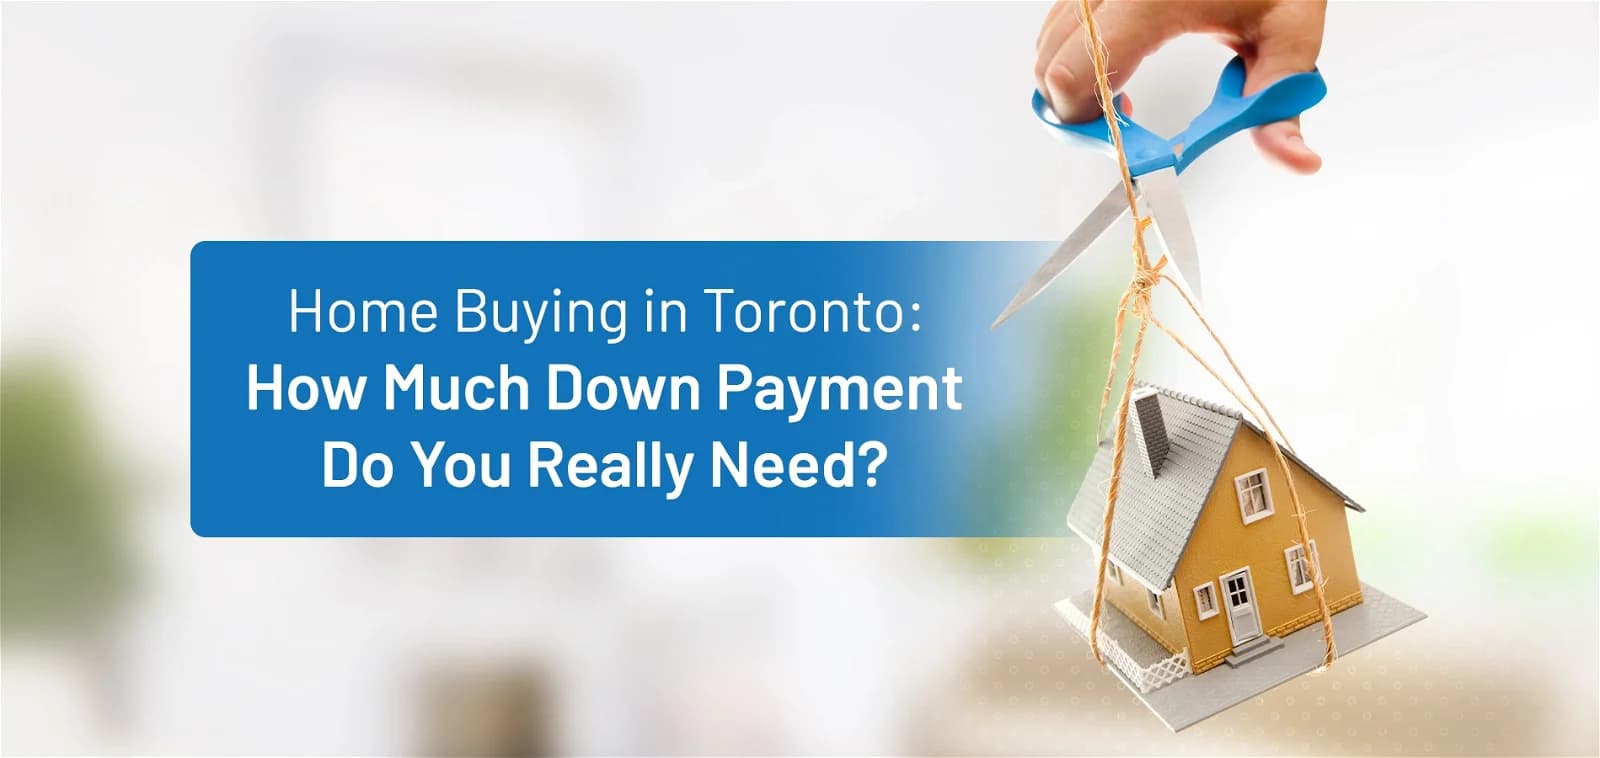 Home Buying in Toronto: How Much Down Payment Do You Really Need?